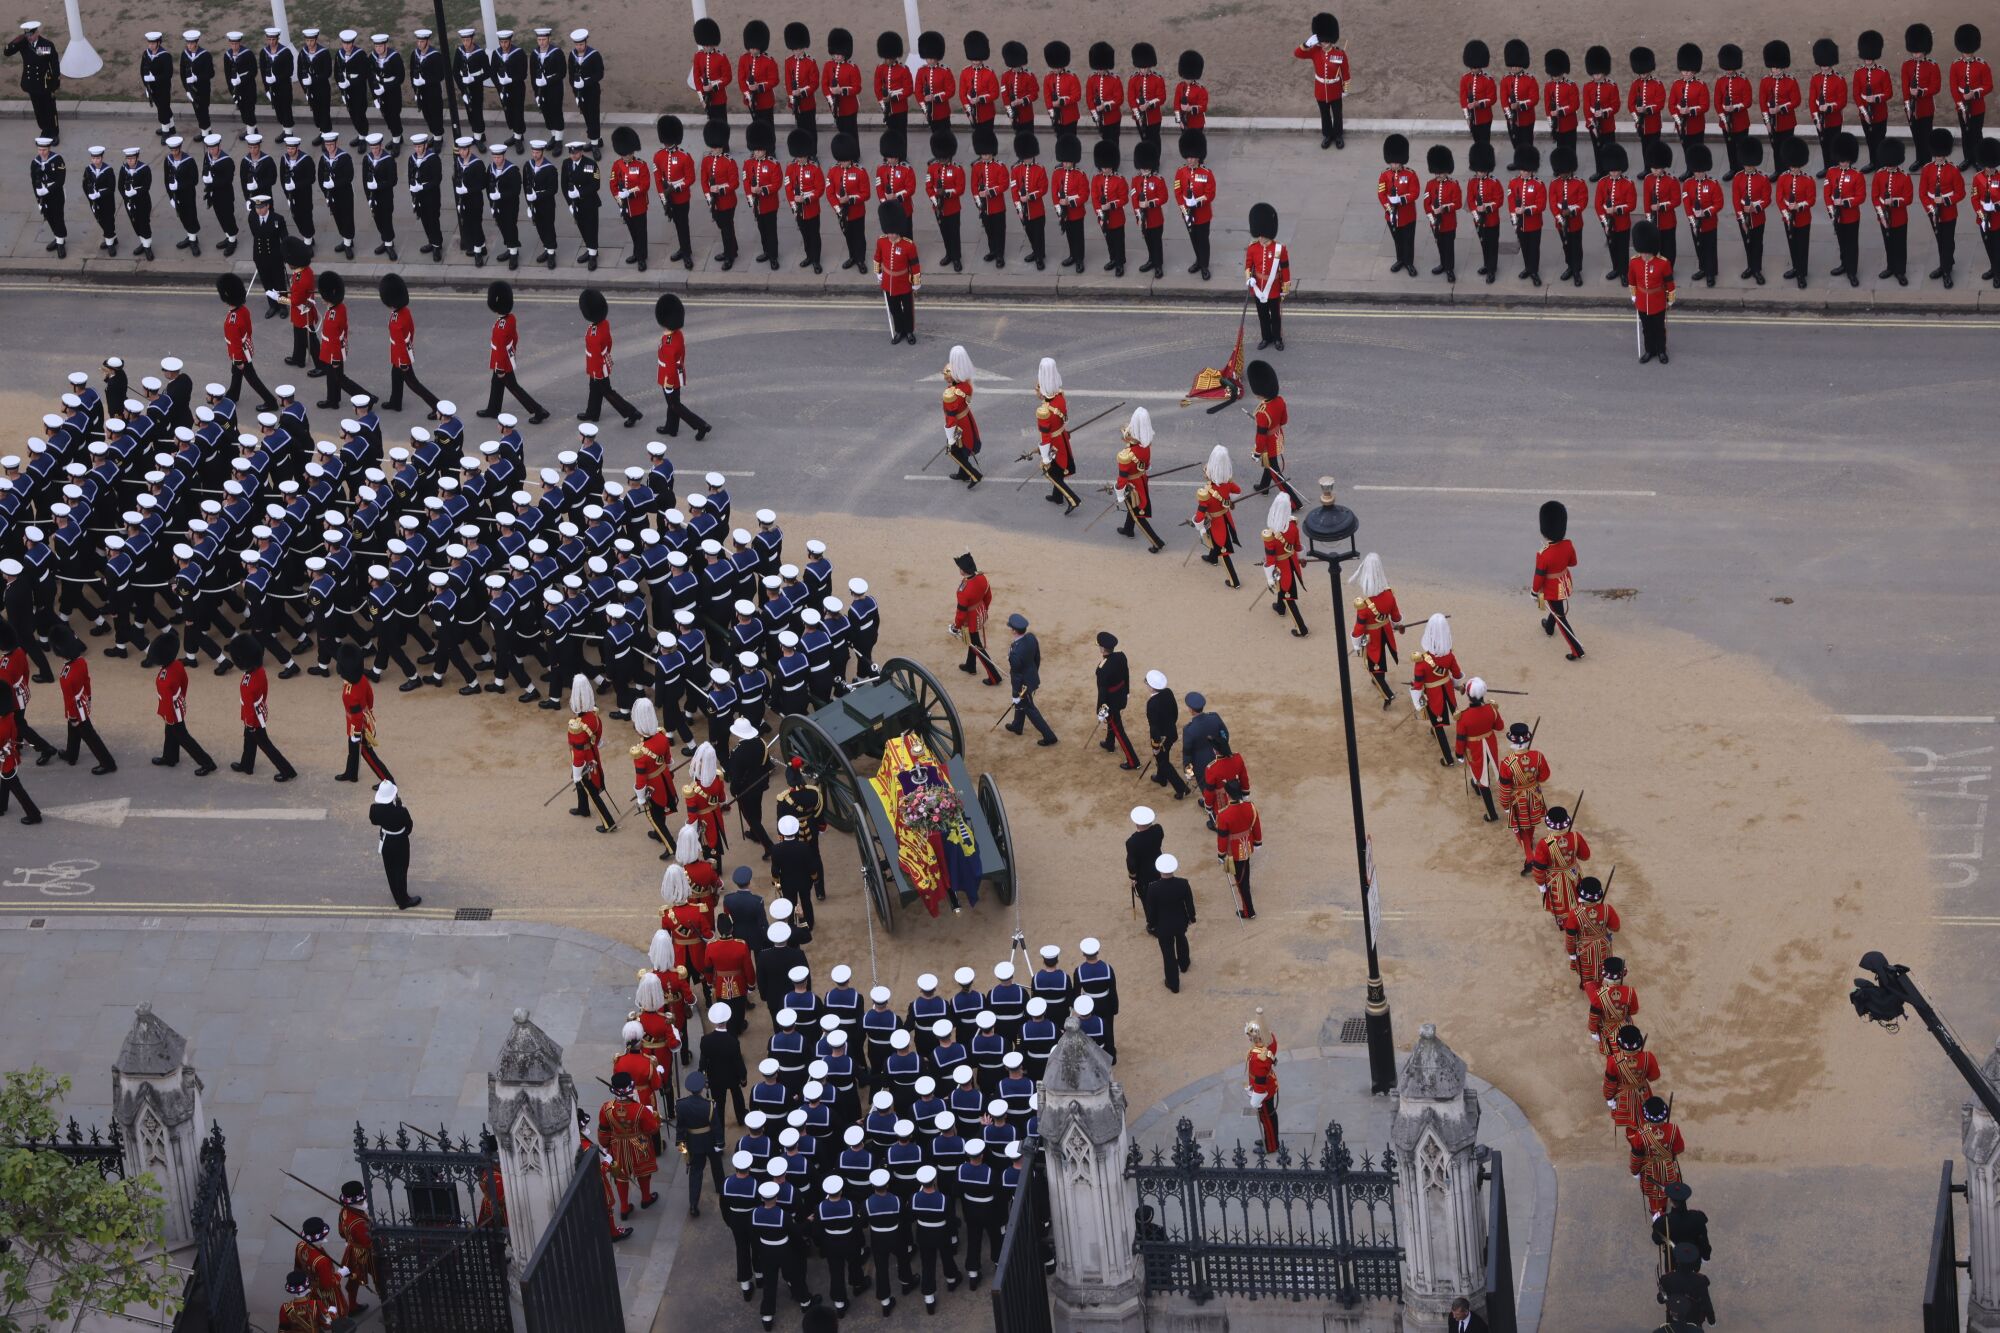 Members of the armed forces march during the funeral procession for Queen Elizabeth II.